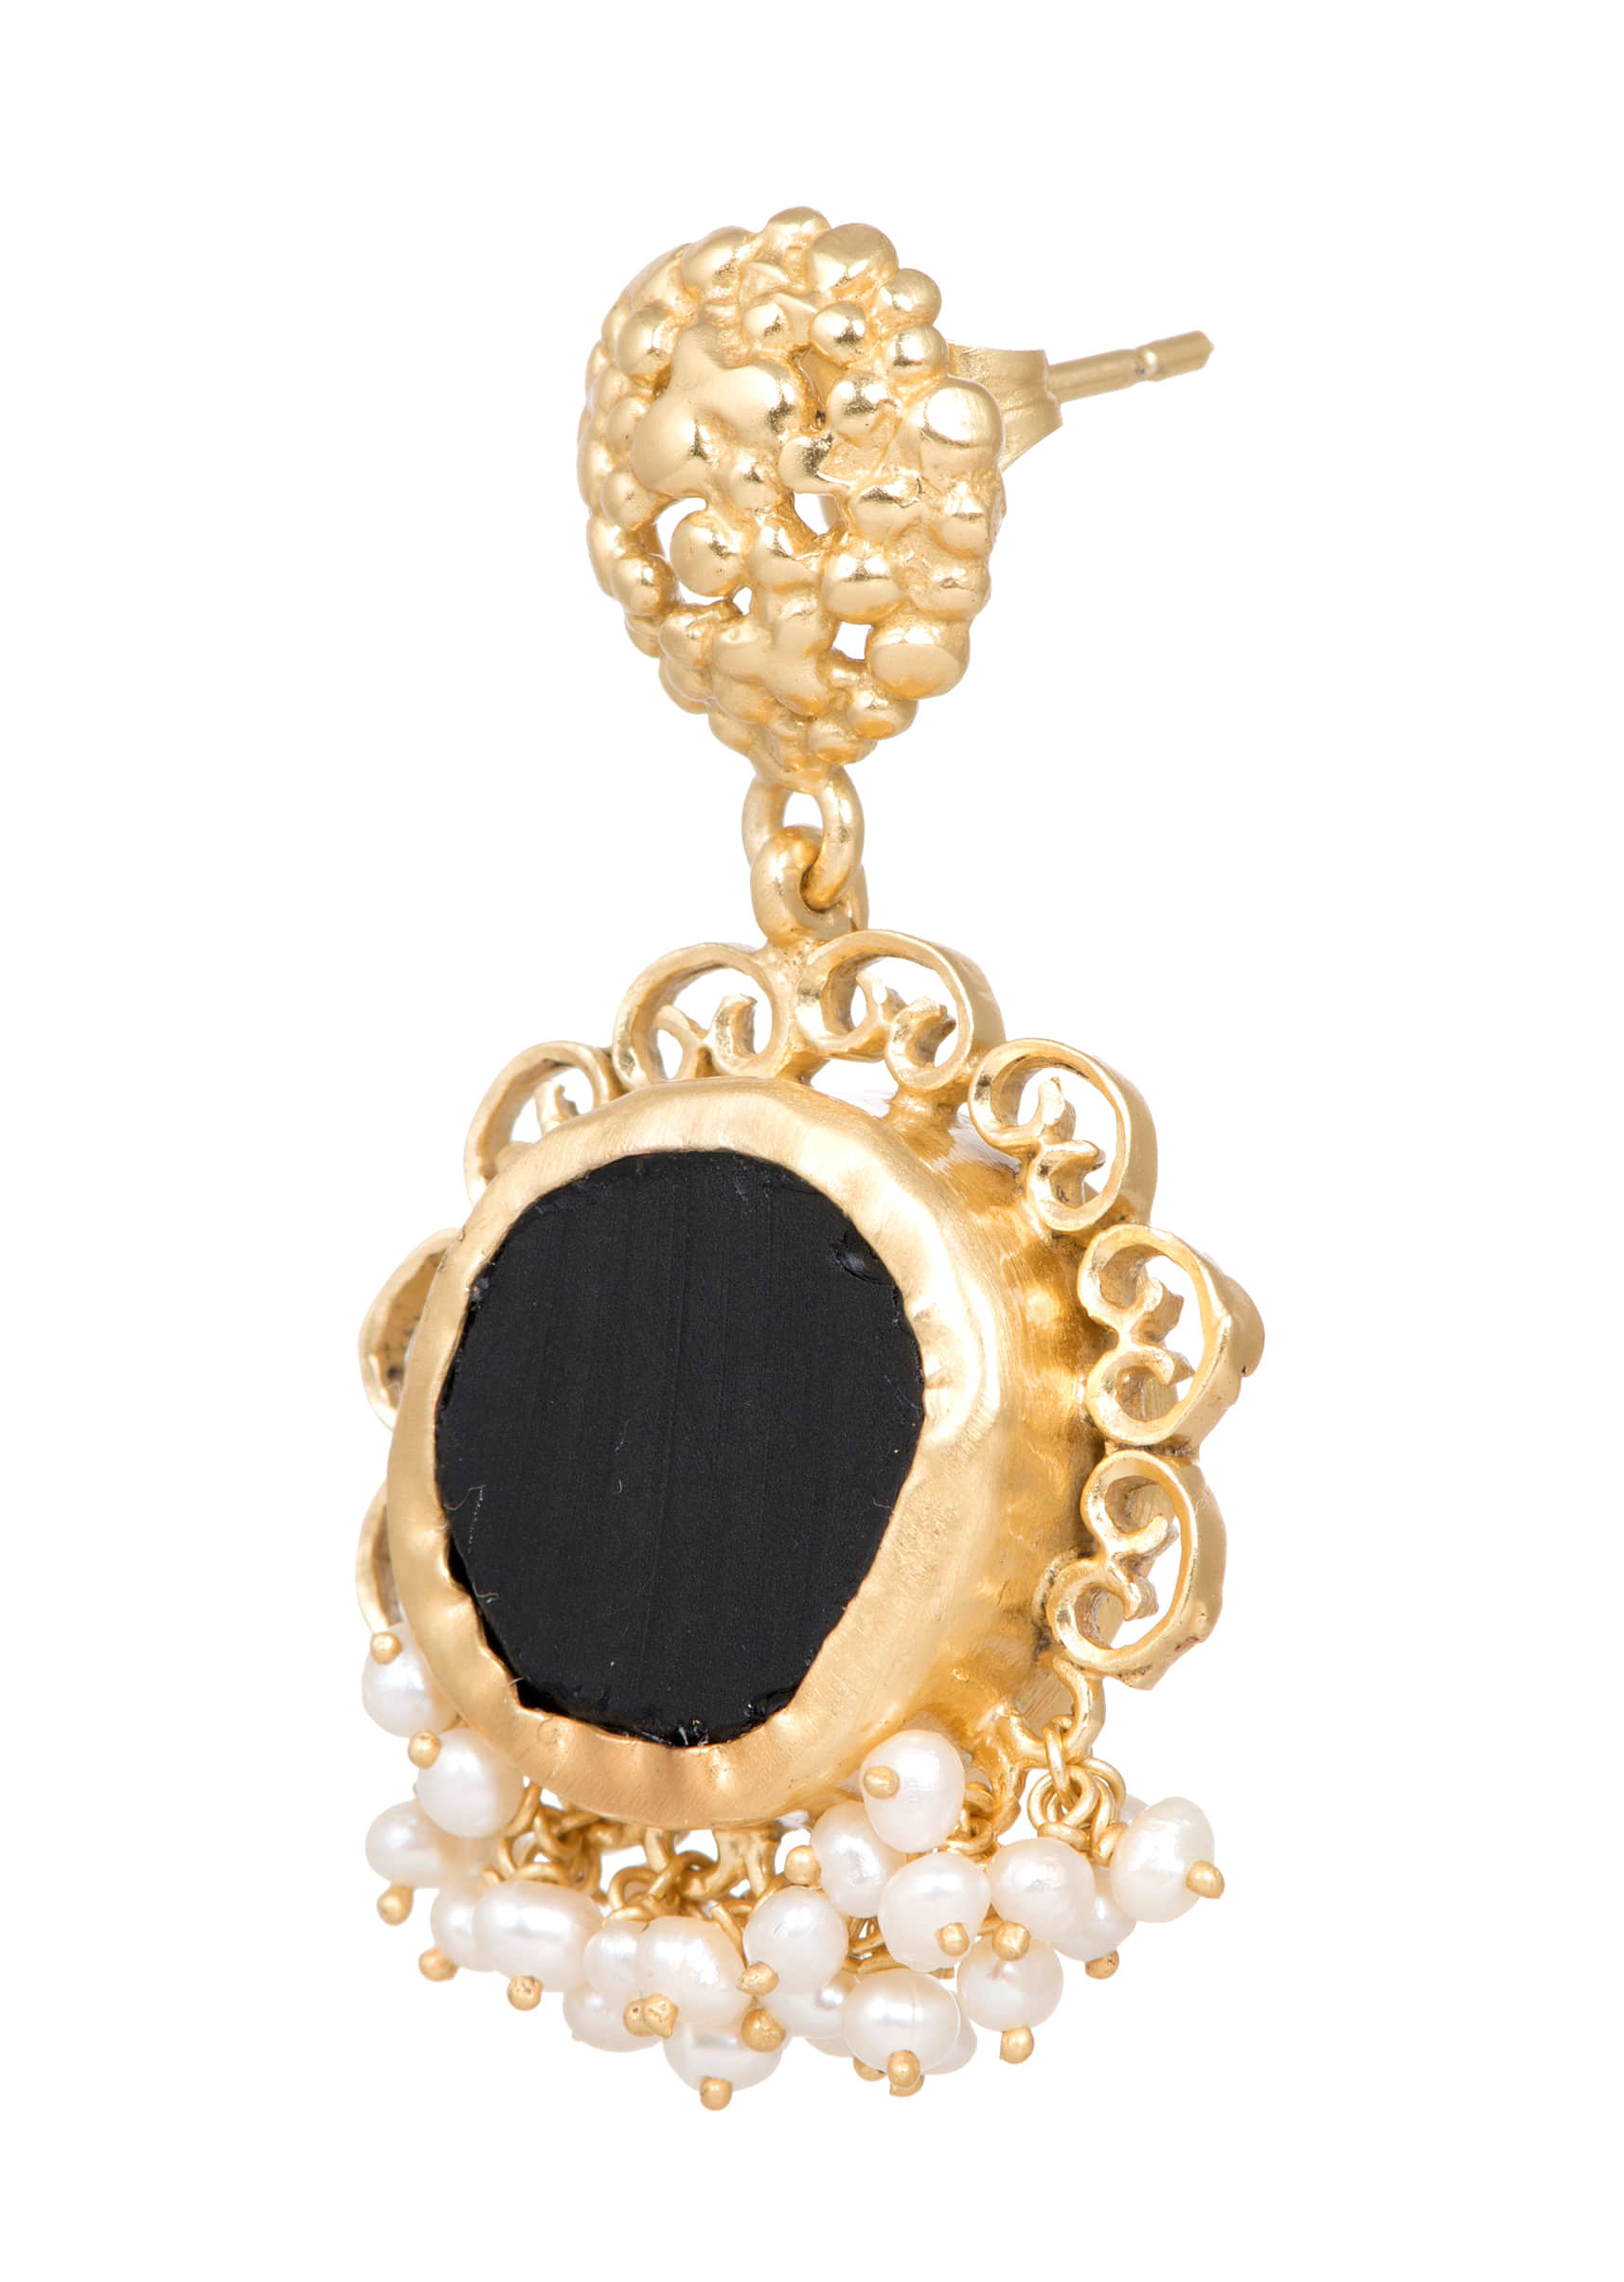 Gold Plated Earrings With Black Onyx And Tiny Bits Of Pearls By Zariin